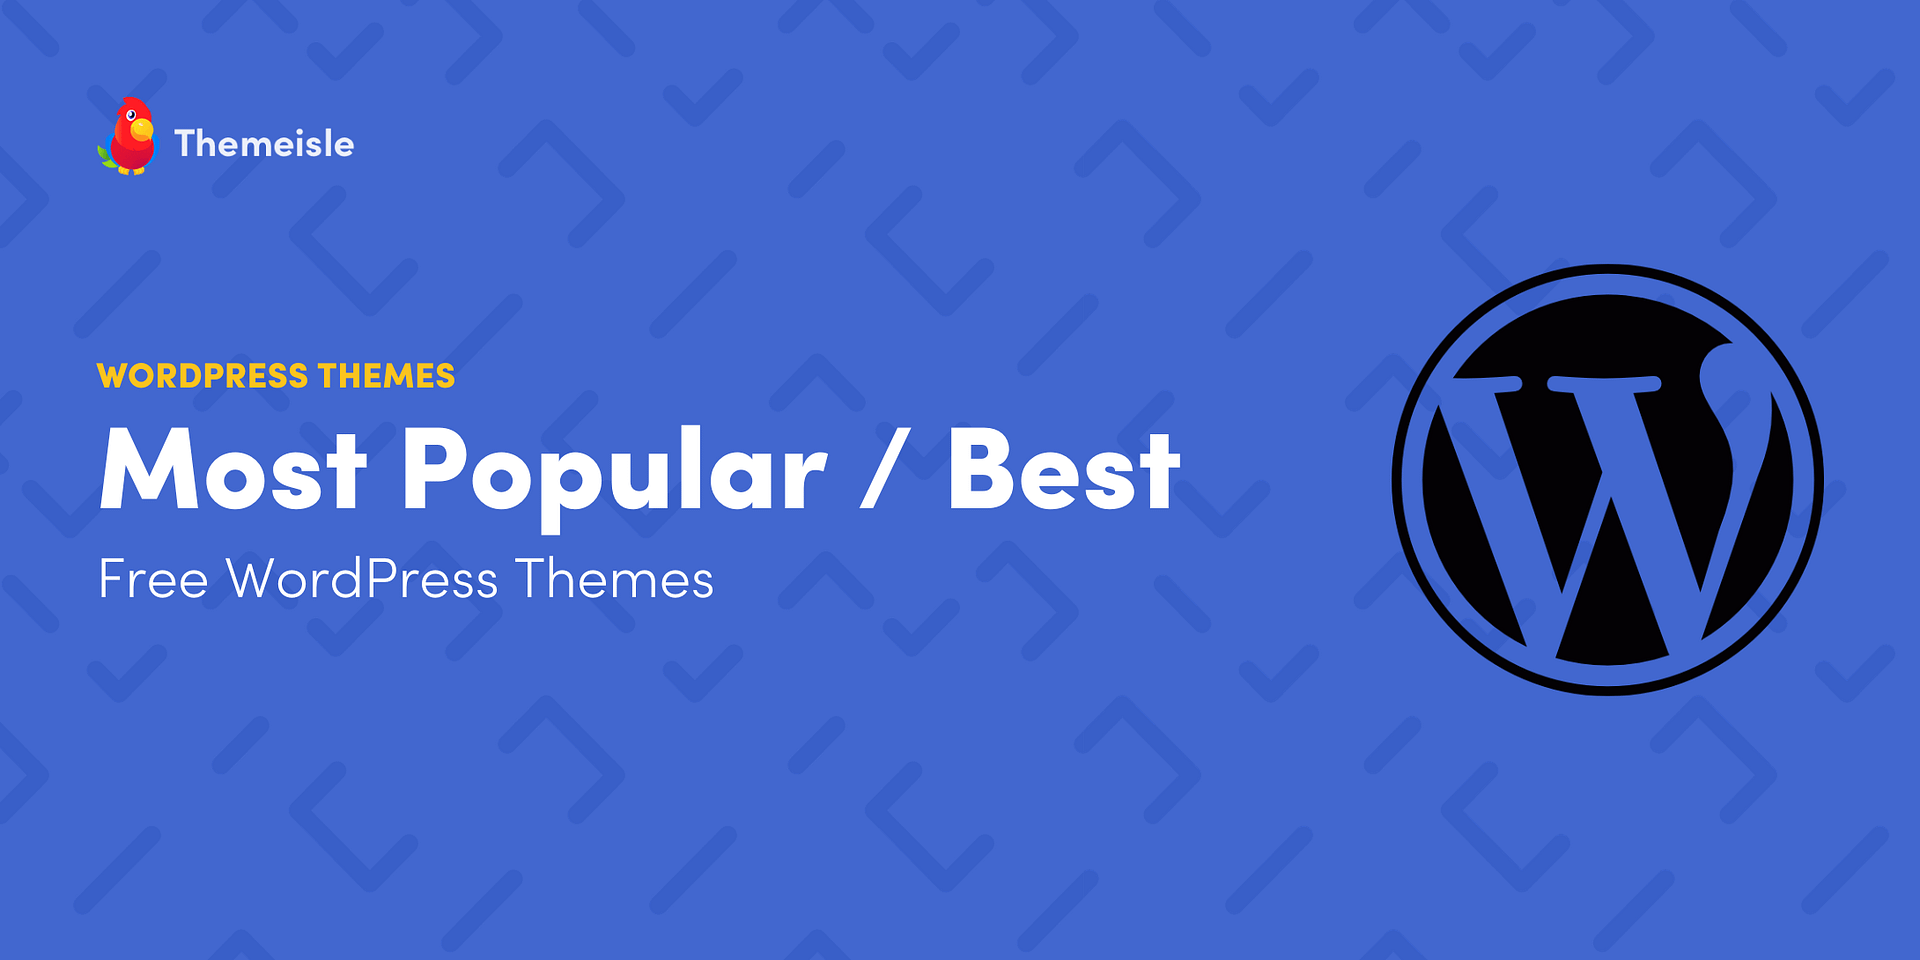 Install the Best WordPress theme and import its demo